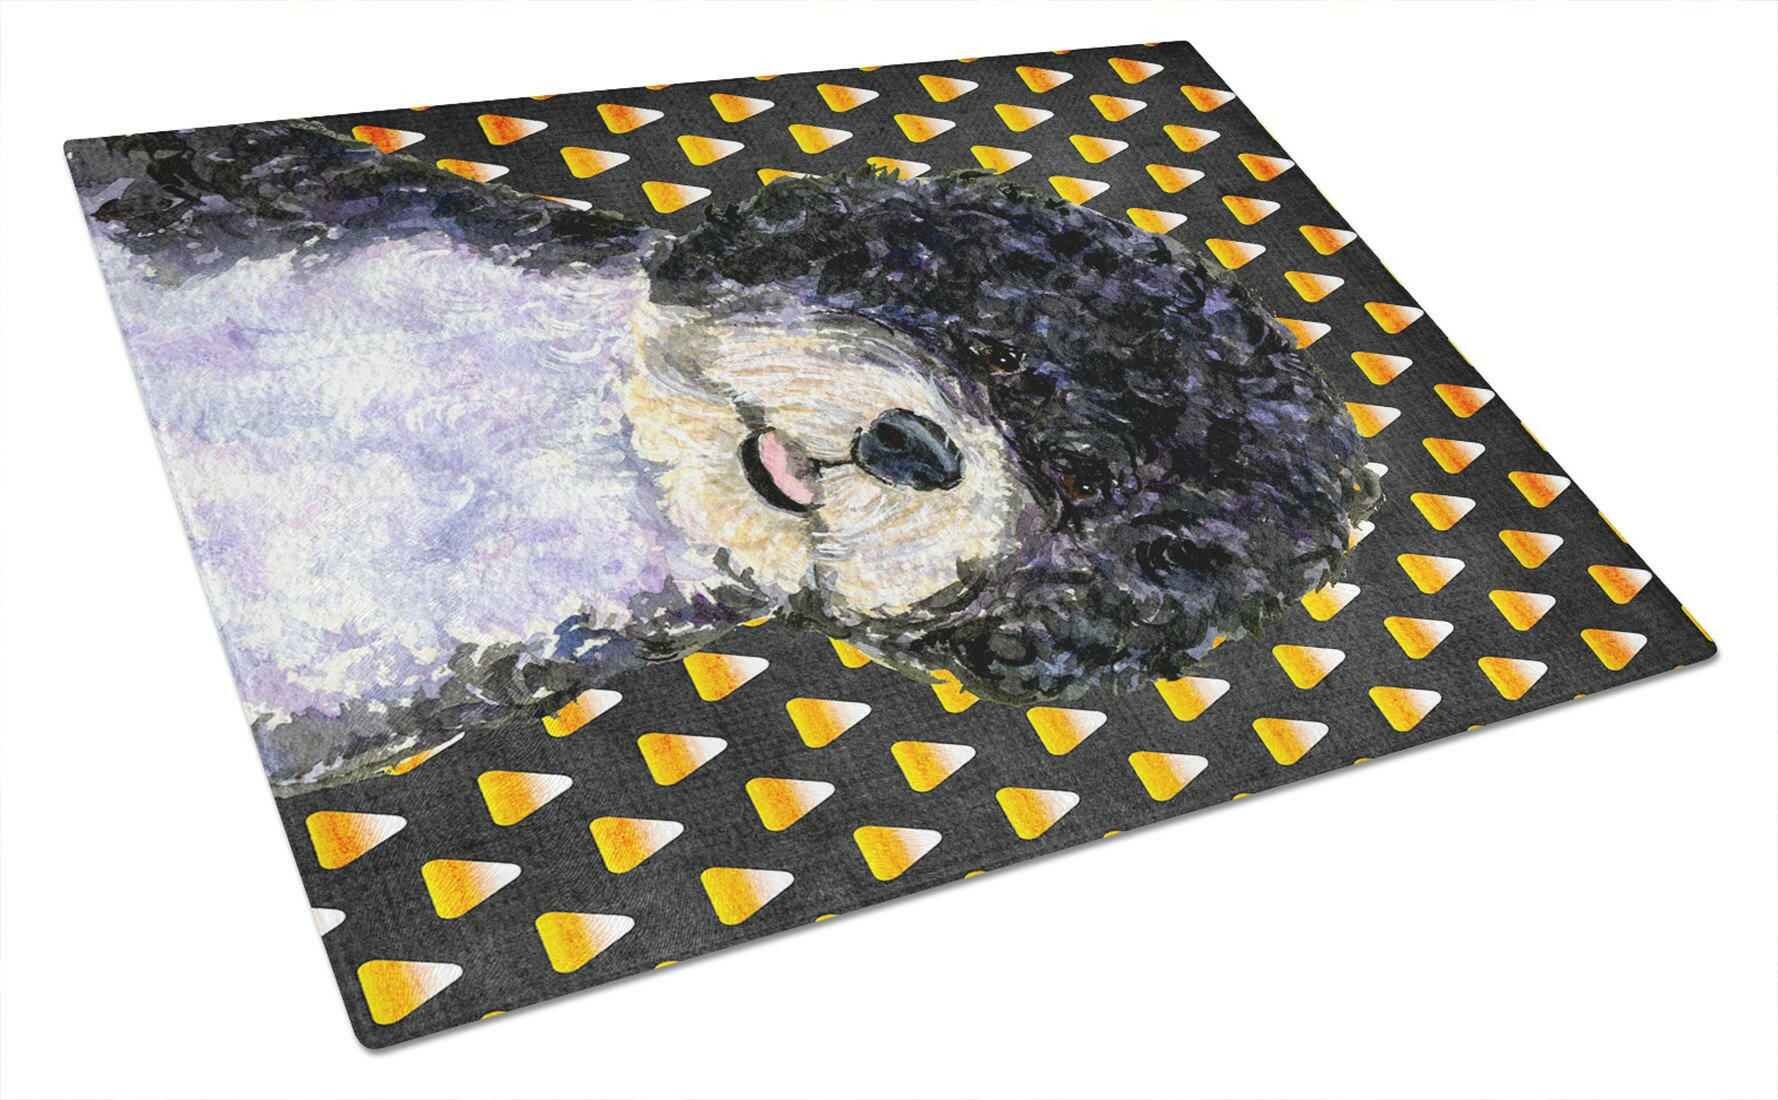 Portuguese Water Dog Candy Corn Halloween Portrait Glass Cutting Board Large by Caroline's Treasures